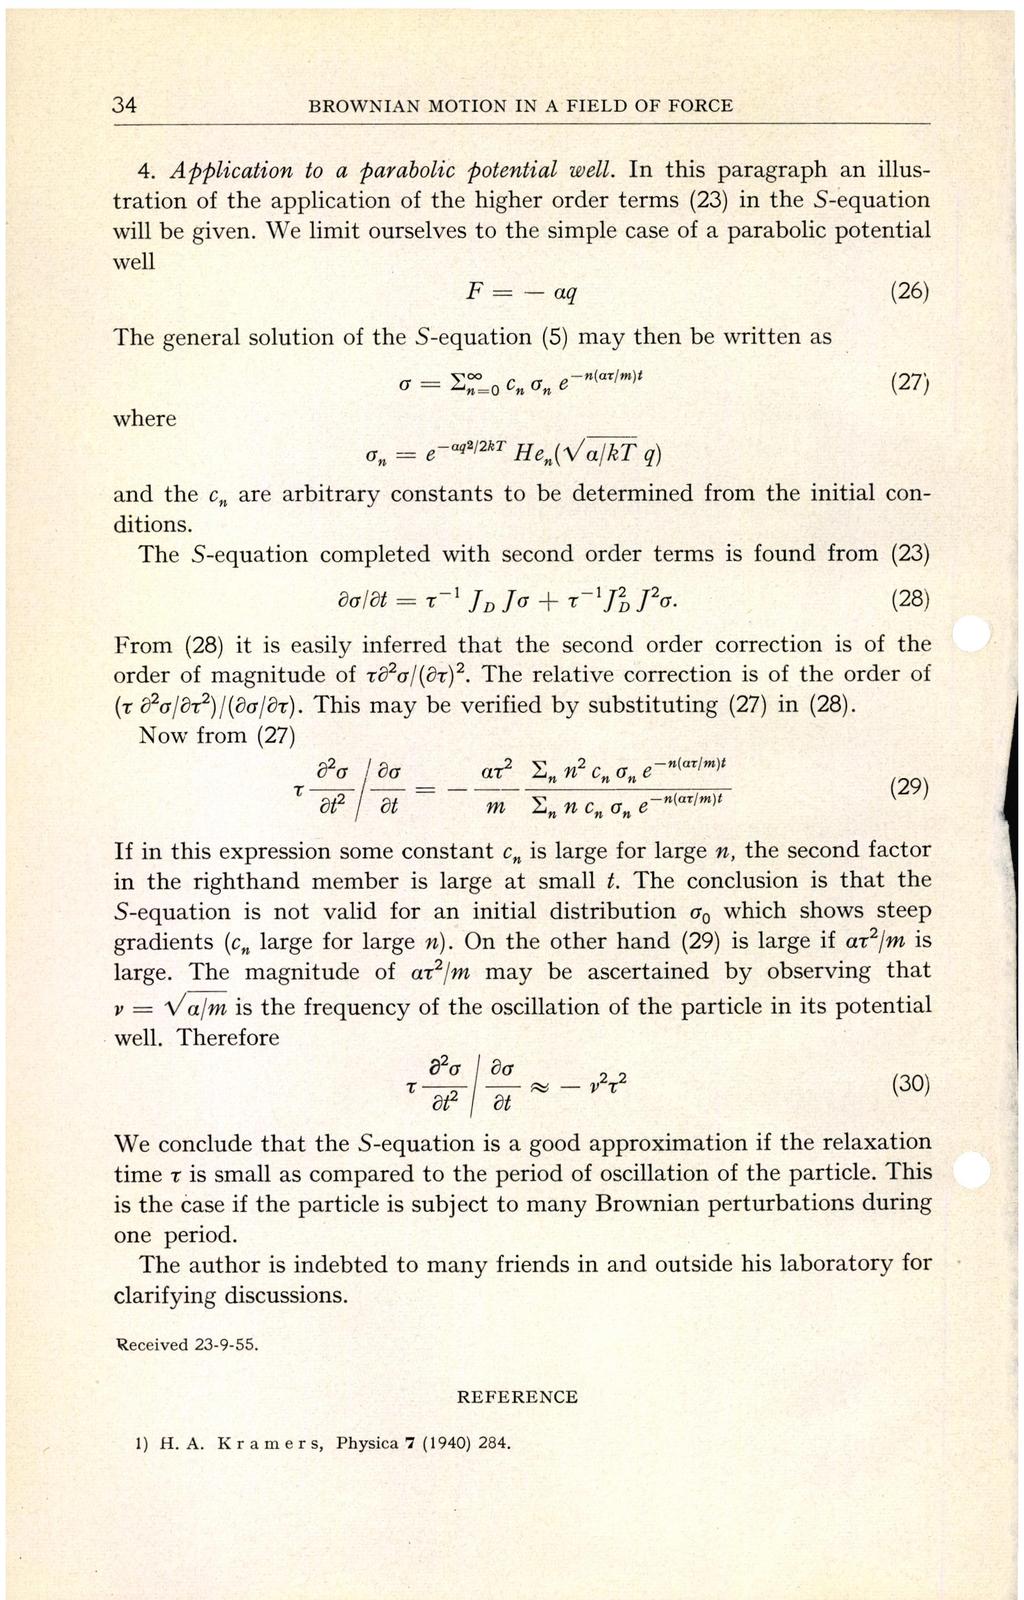 34 BROWNIAN MOTION IN A FIELD OF FORCE a. Appl,ication to a parabol,ic potential, well.